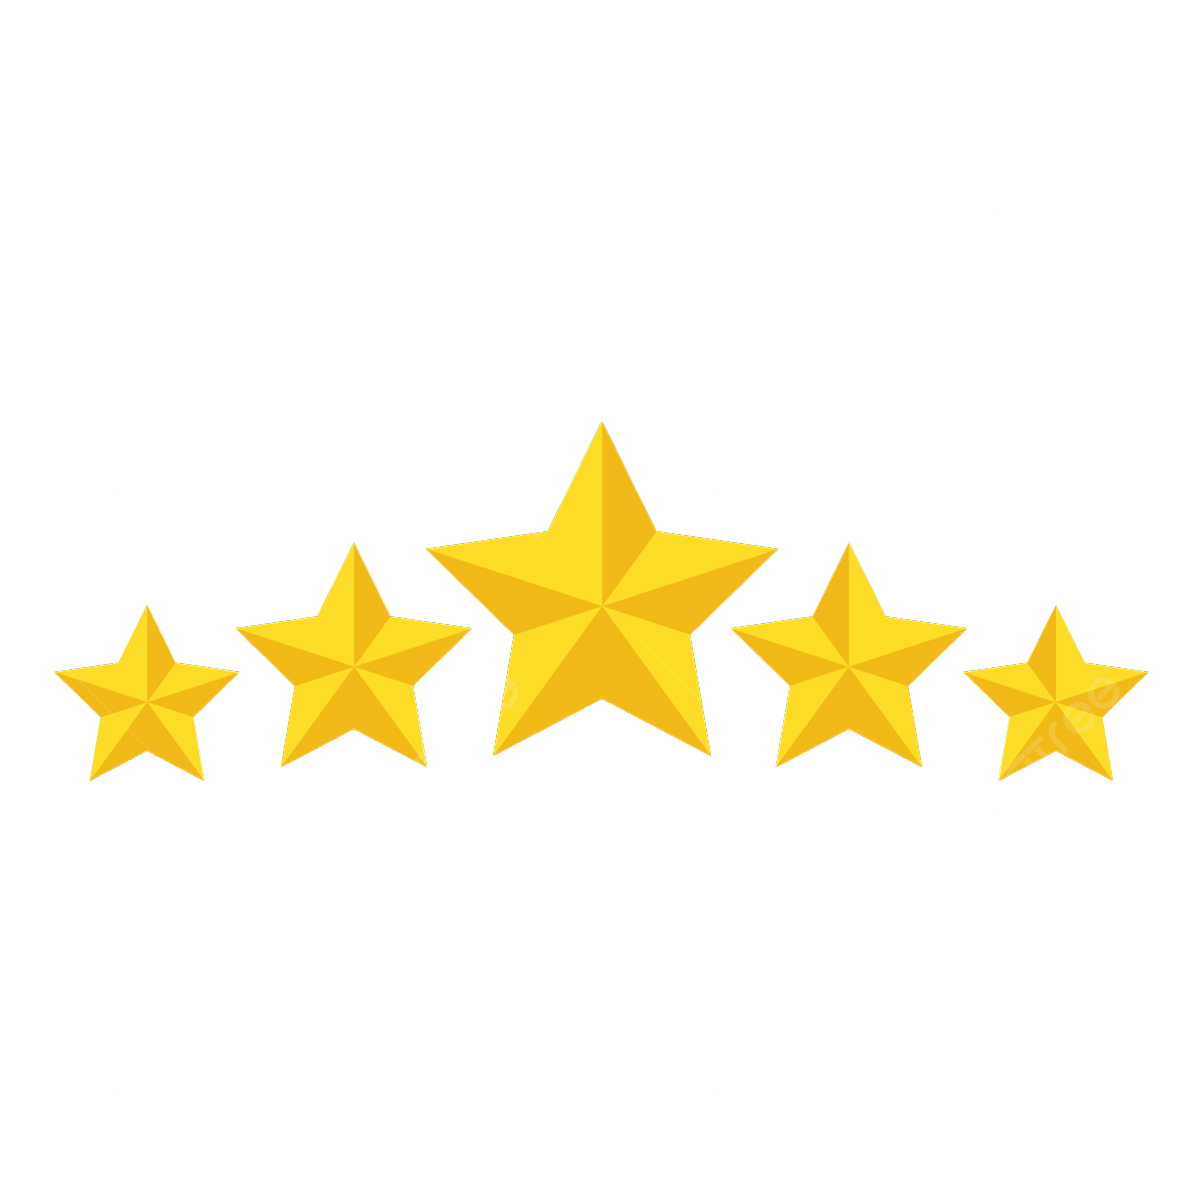 pngtree-five-stars-flat-icons-design-template-png-image_9028003